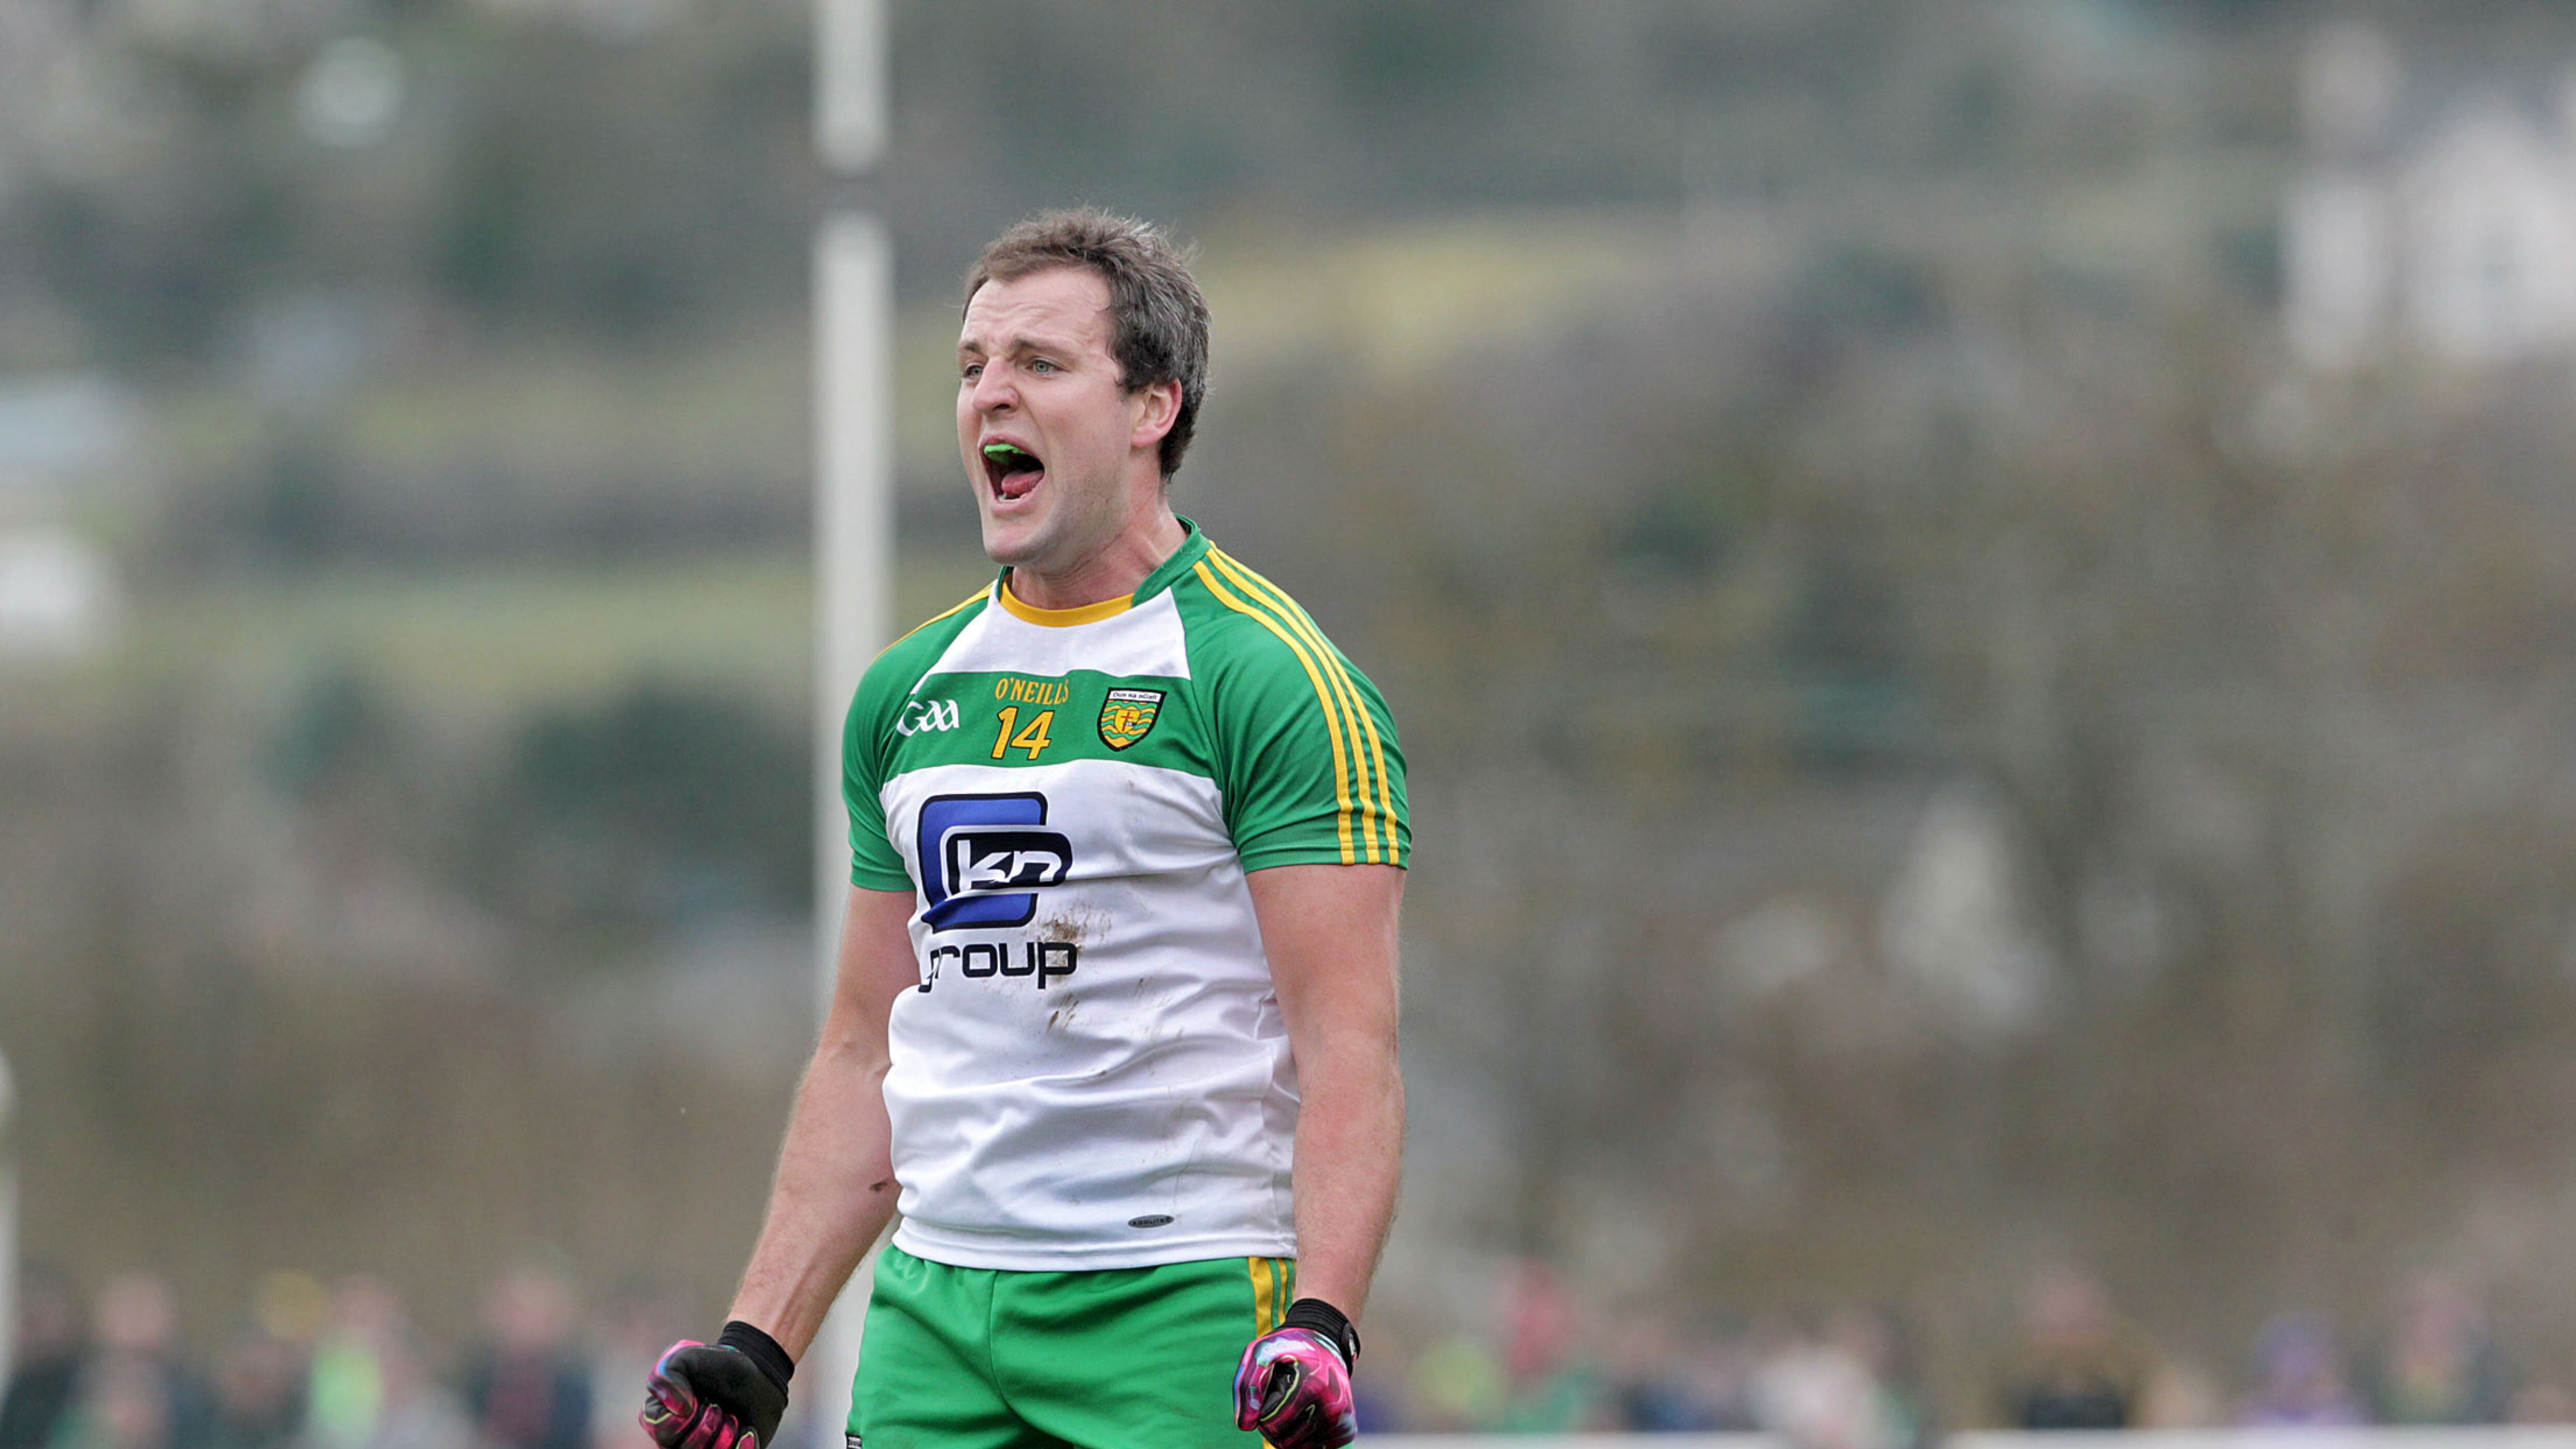 In what has already been a stellar career, Michael Murphy, regarded by many as perhaps the best Gaelic footballer currently playing the game, will always be remembered for captaining his county to the All-Ireland title in 2012